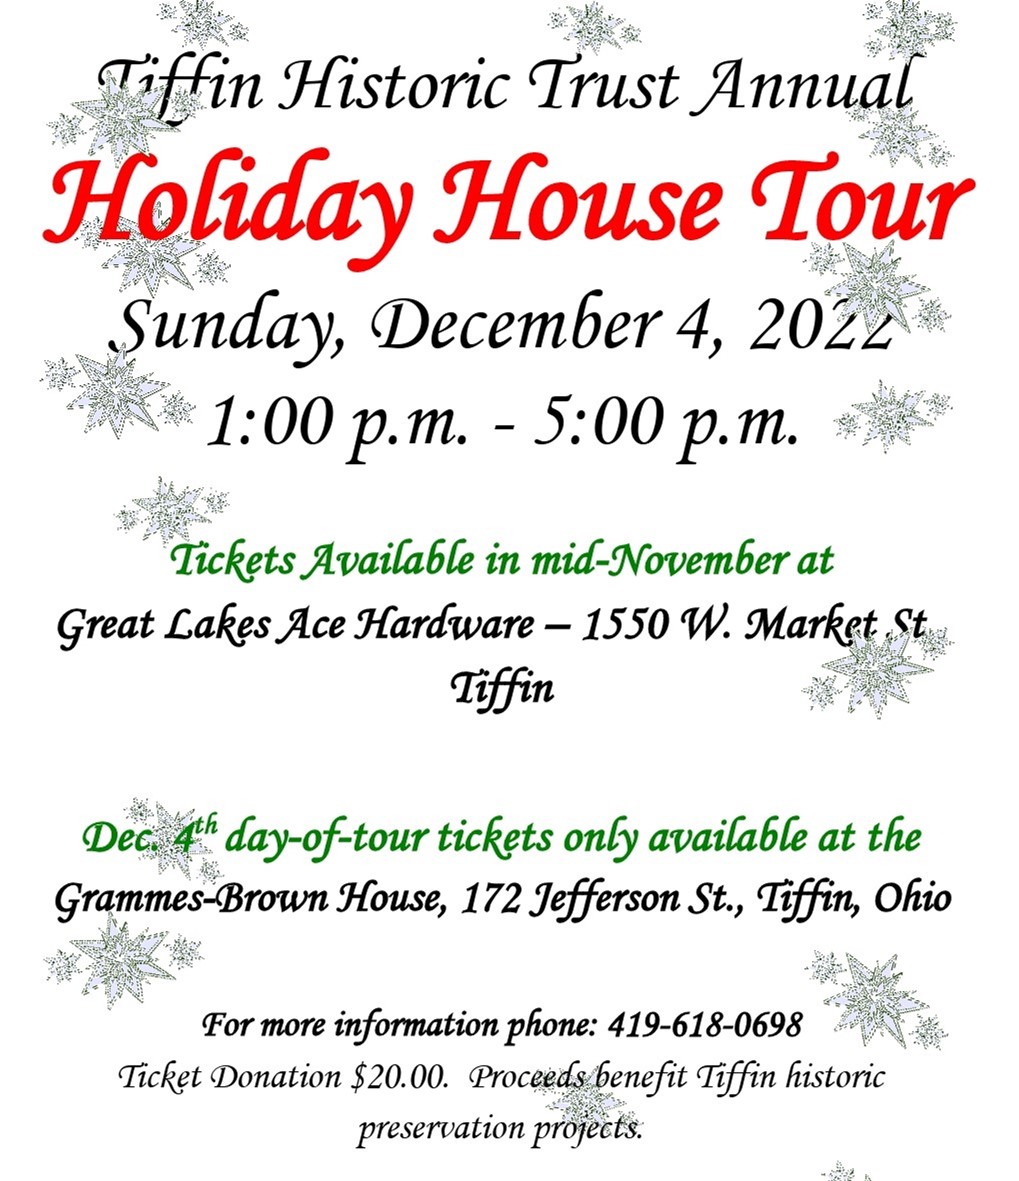 Tiffin Historic Trust Annual Holiday House Tour